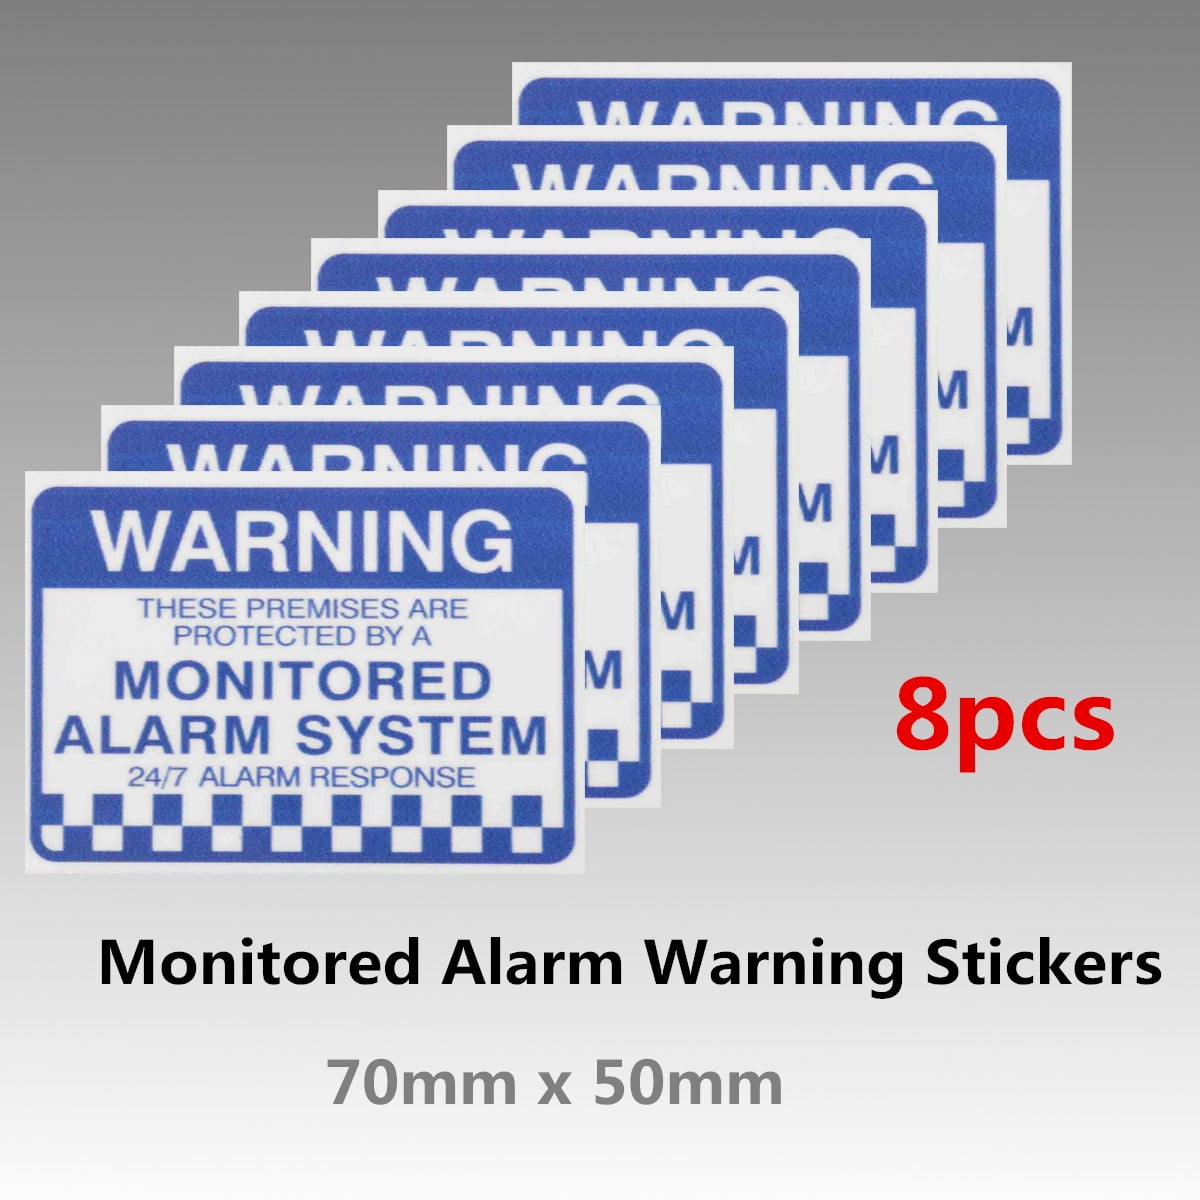 Monitored alarm Warning stickers 100 pack quality 7 yr water & fade proof vinyl 